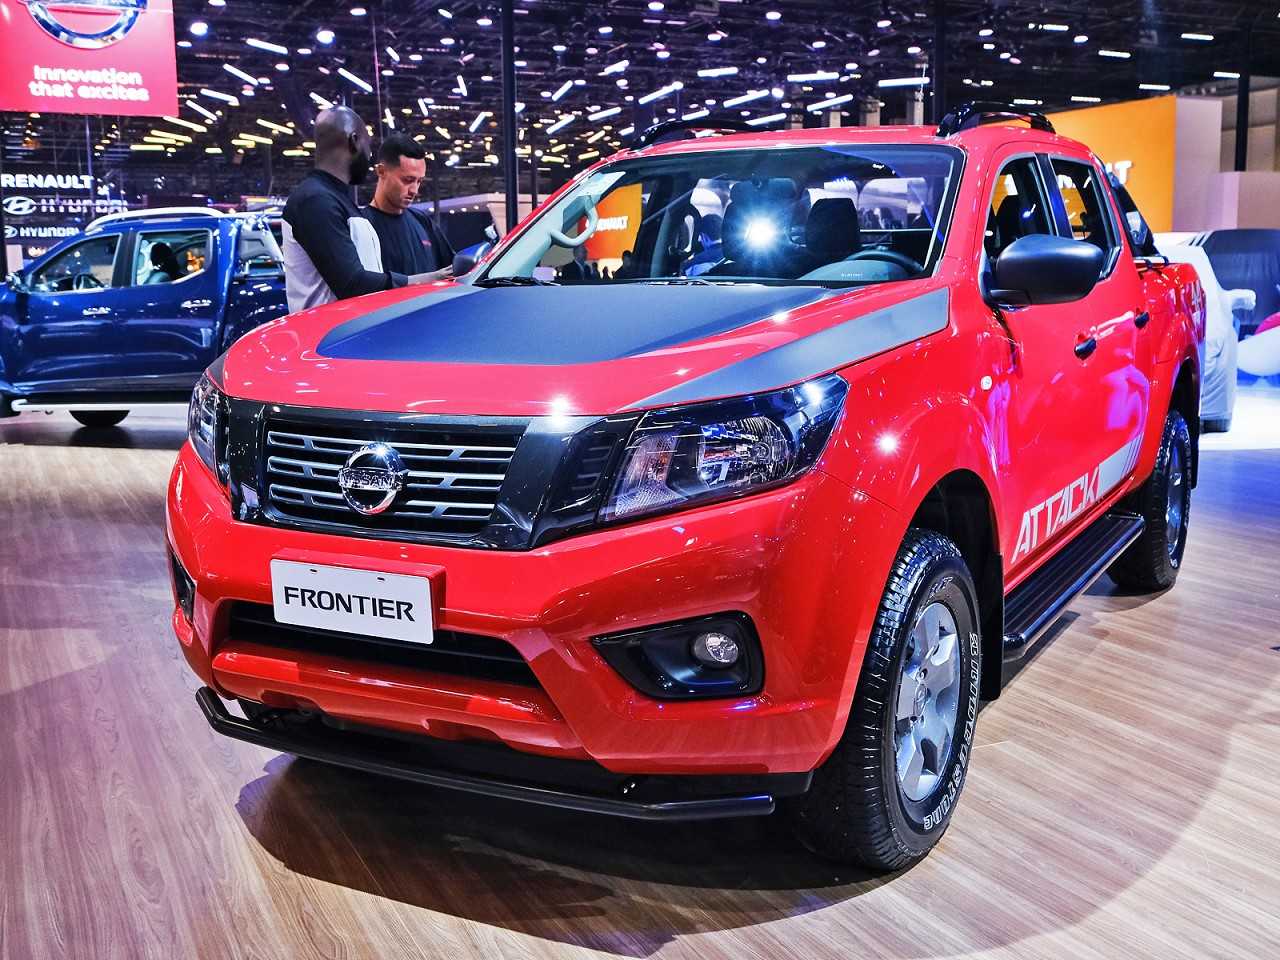 NissanFrontier 2019 - ngulo frontal